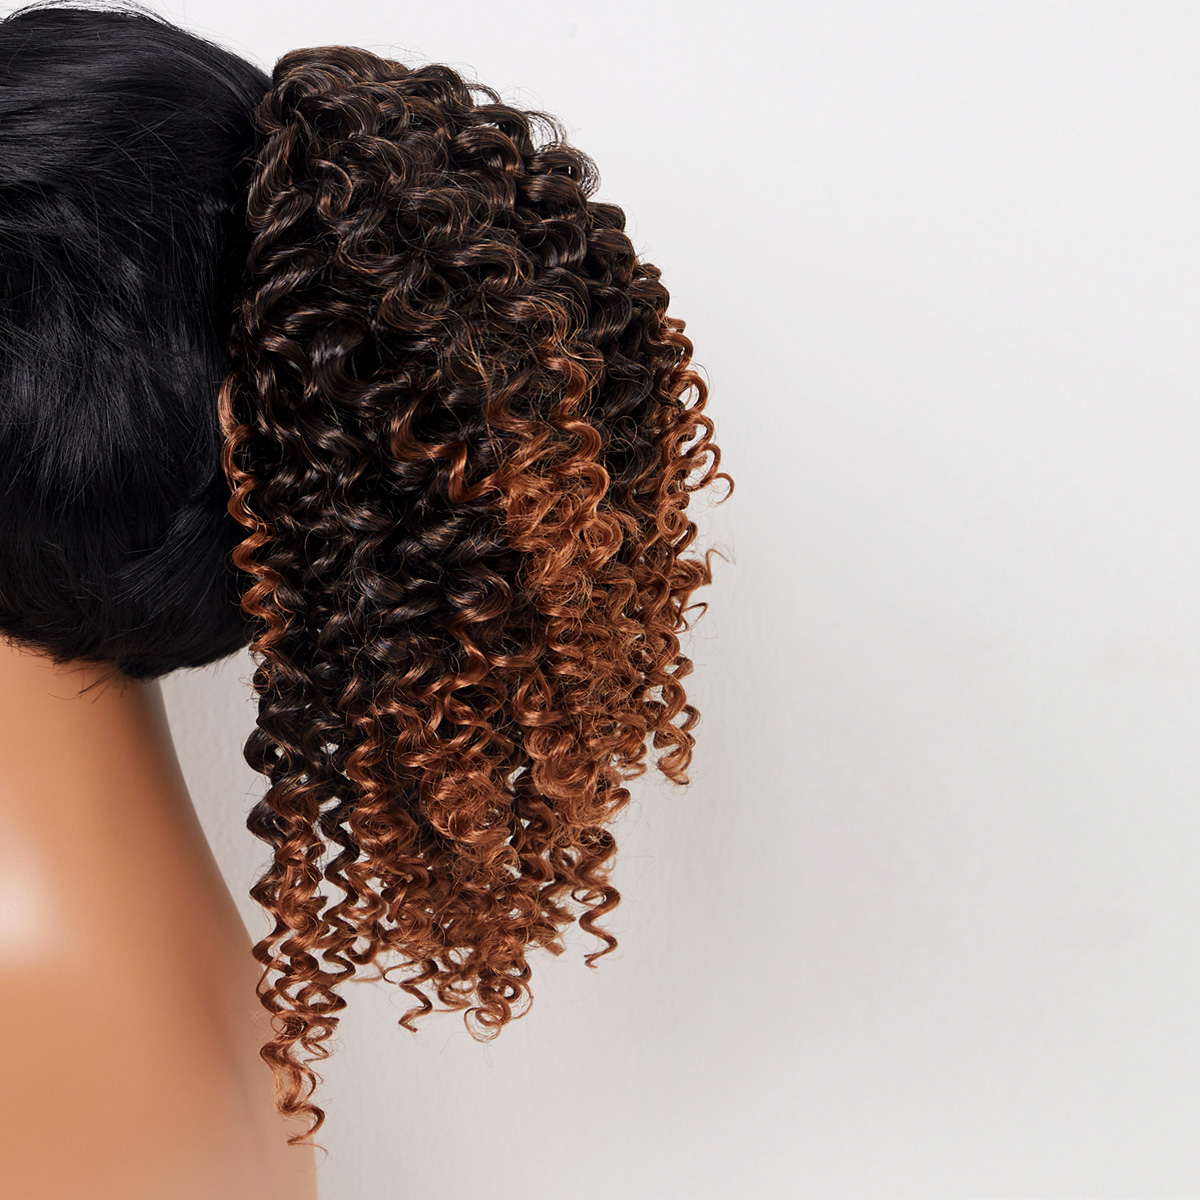 Curly Short Brown Ponytail Wig for Women